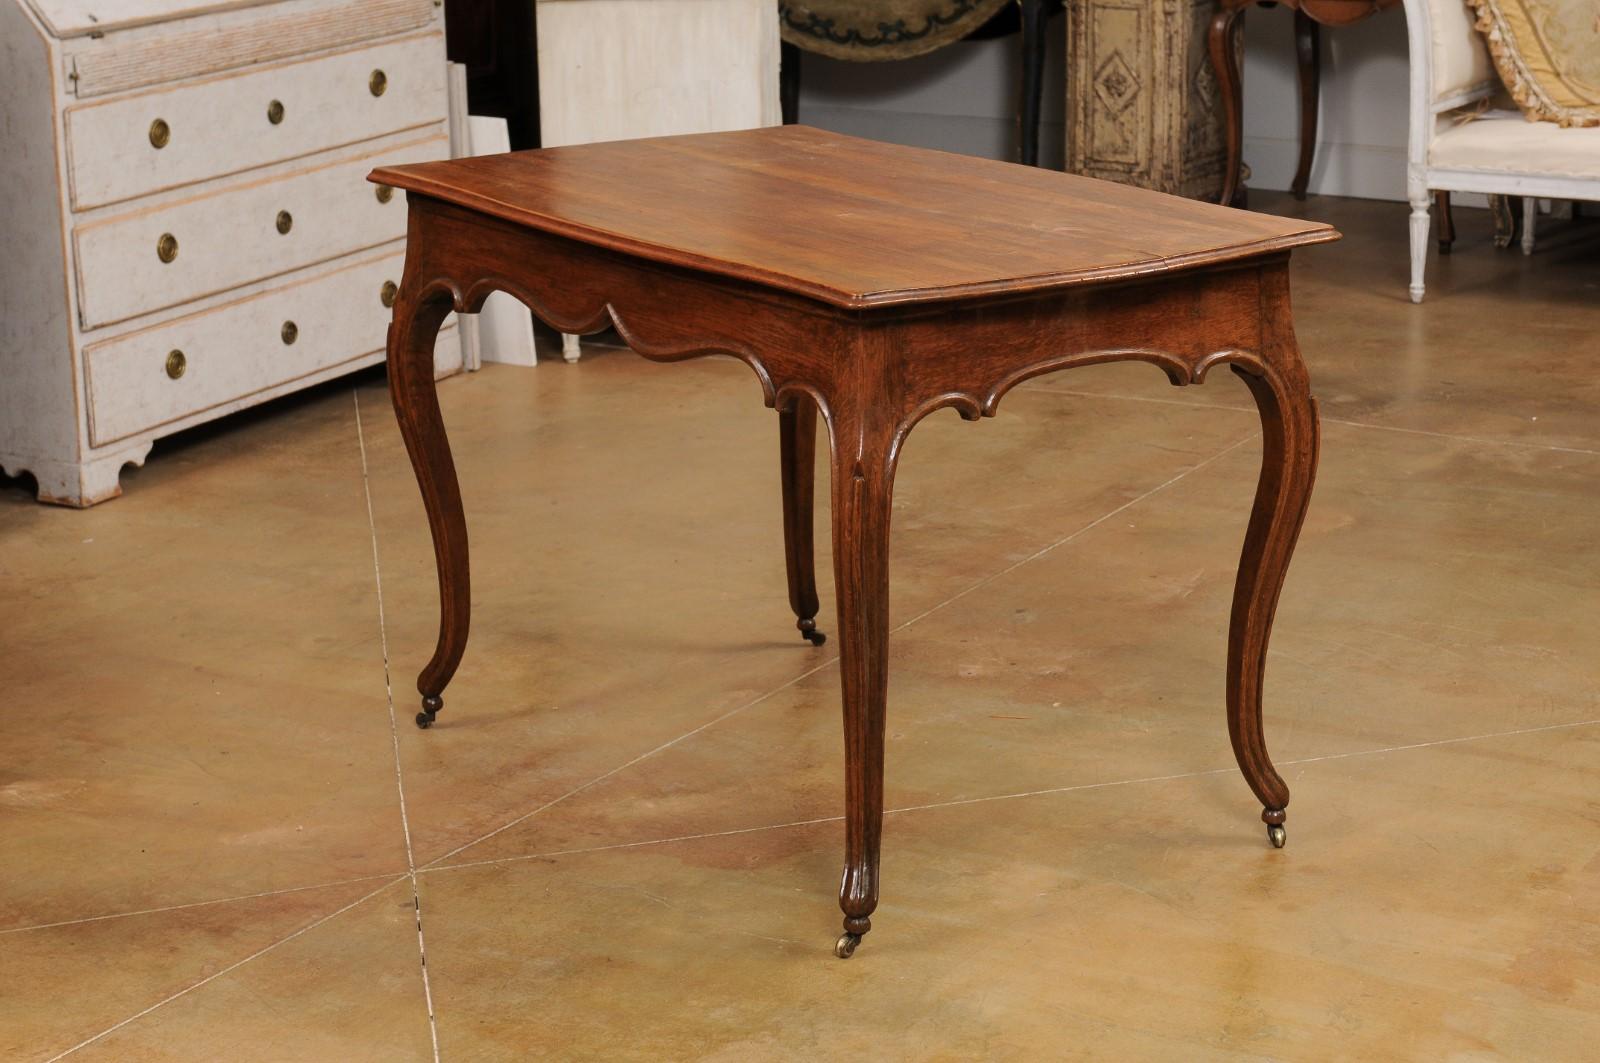 Italian Rococo Early 19th Century Oak Table with Carved Apron and Cabriole Legs For Sale 2